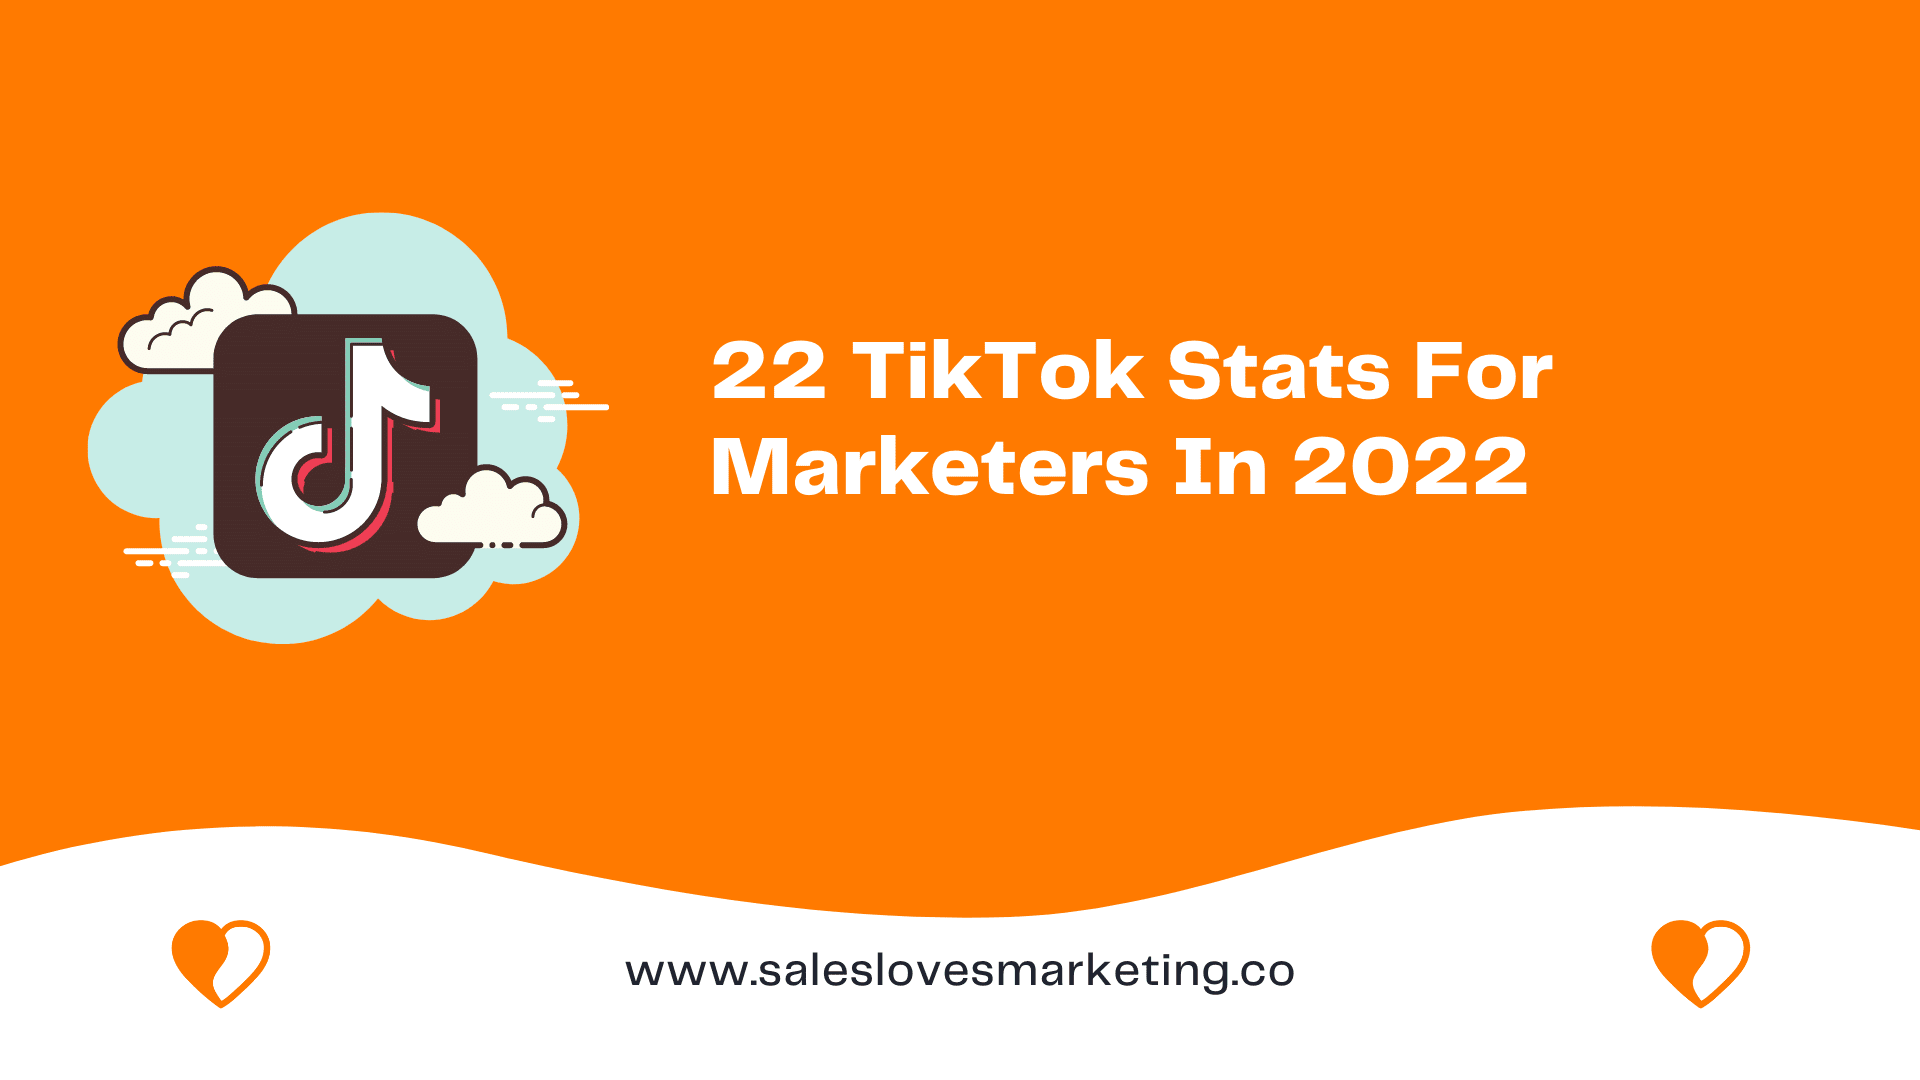 22 TikTok Stats For Marketers In 2022